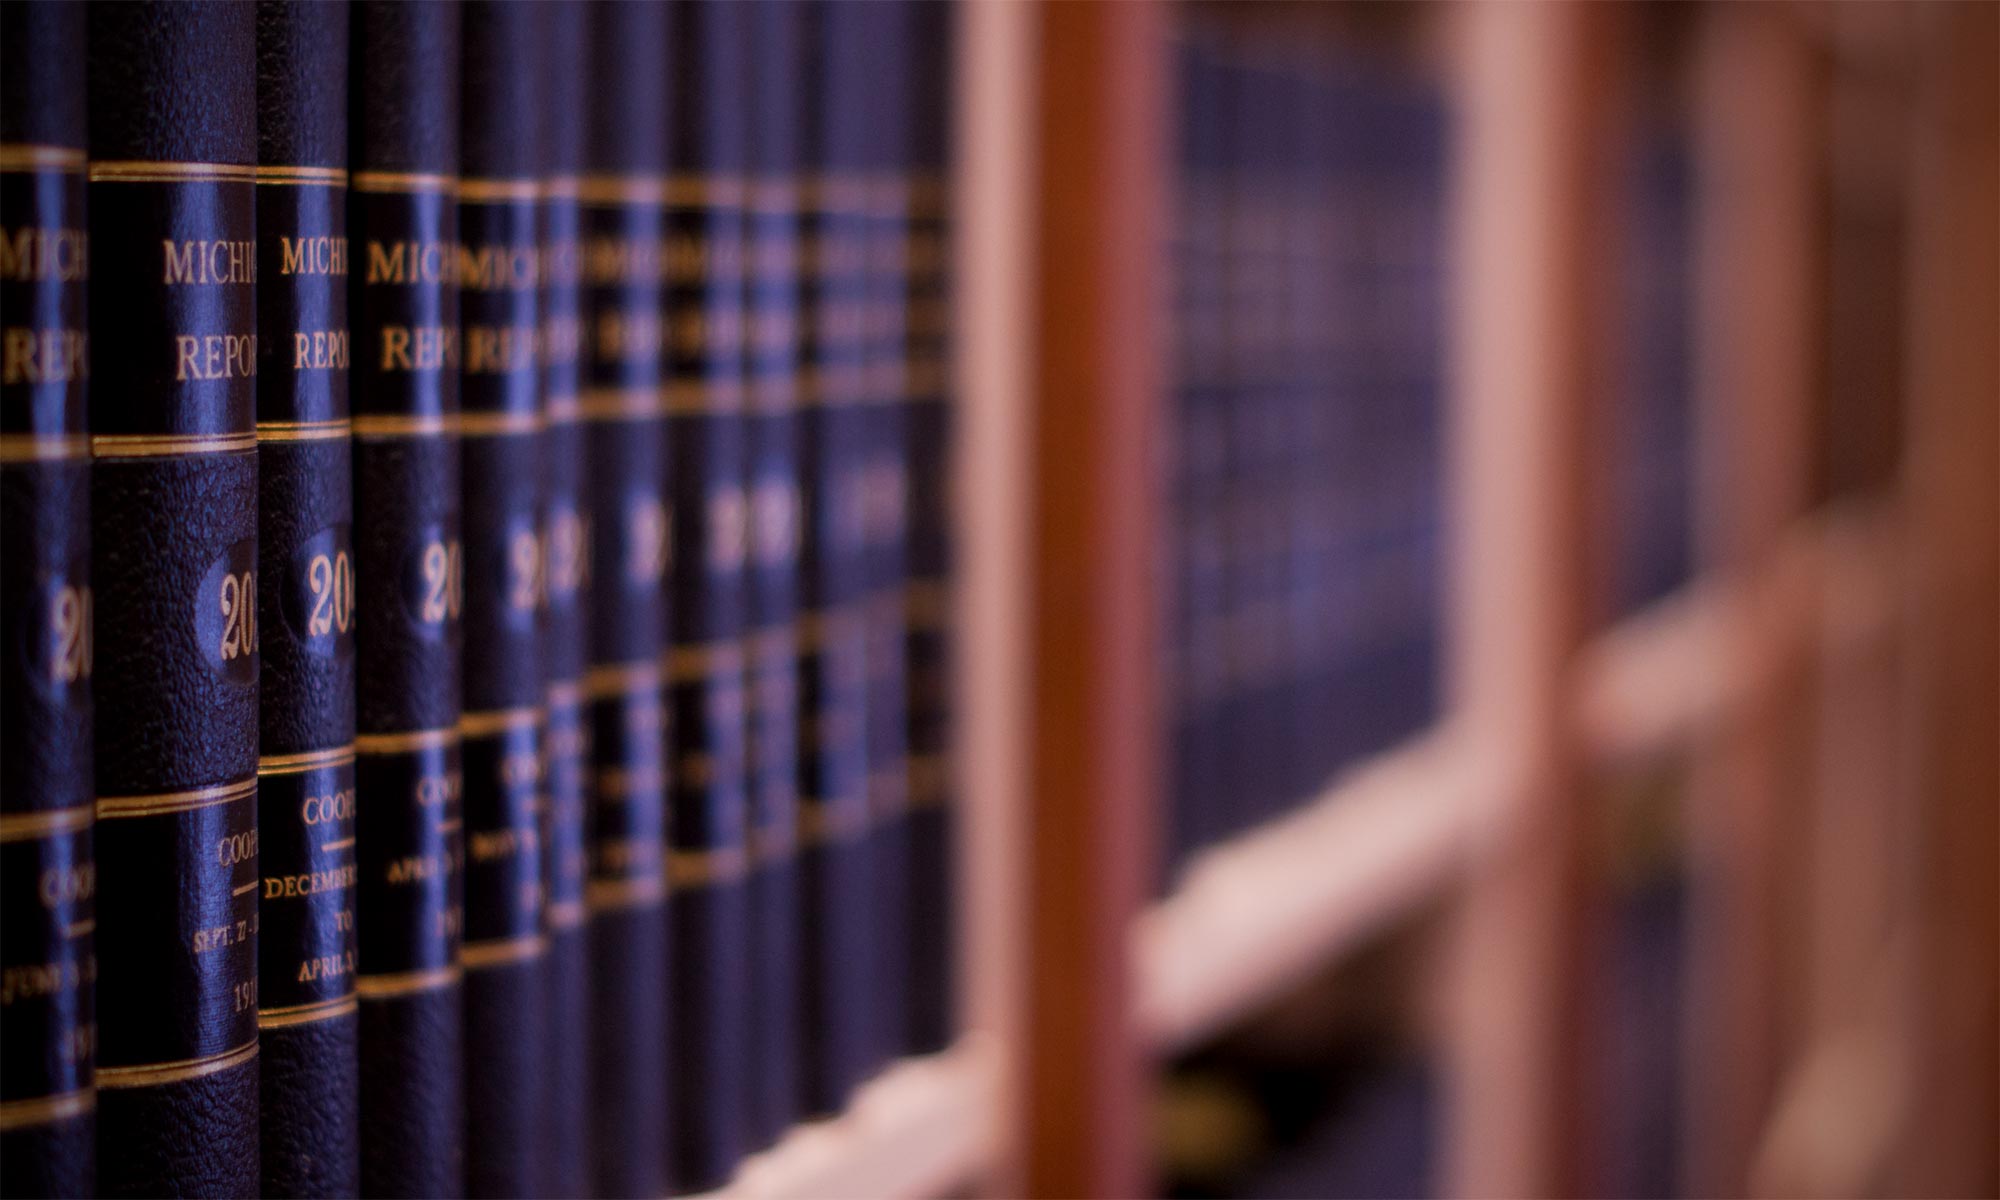 Background image of law books on a shelf